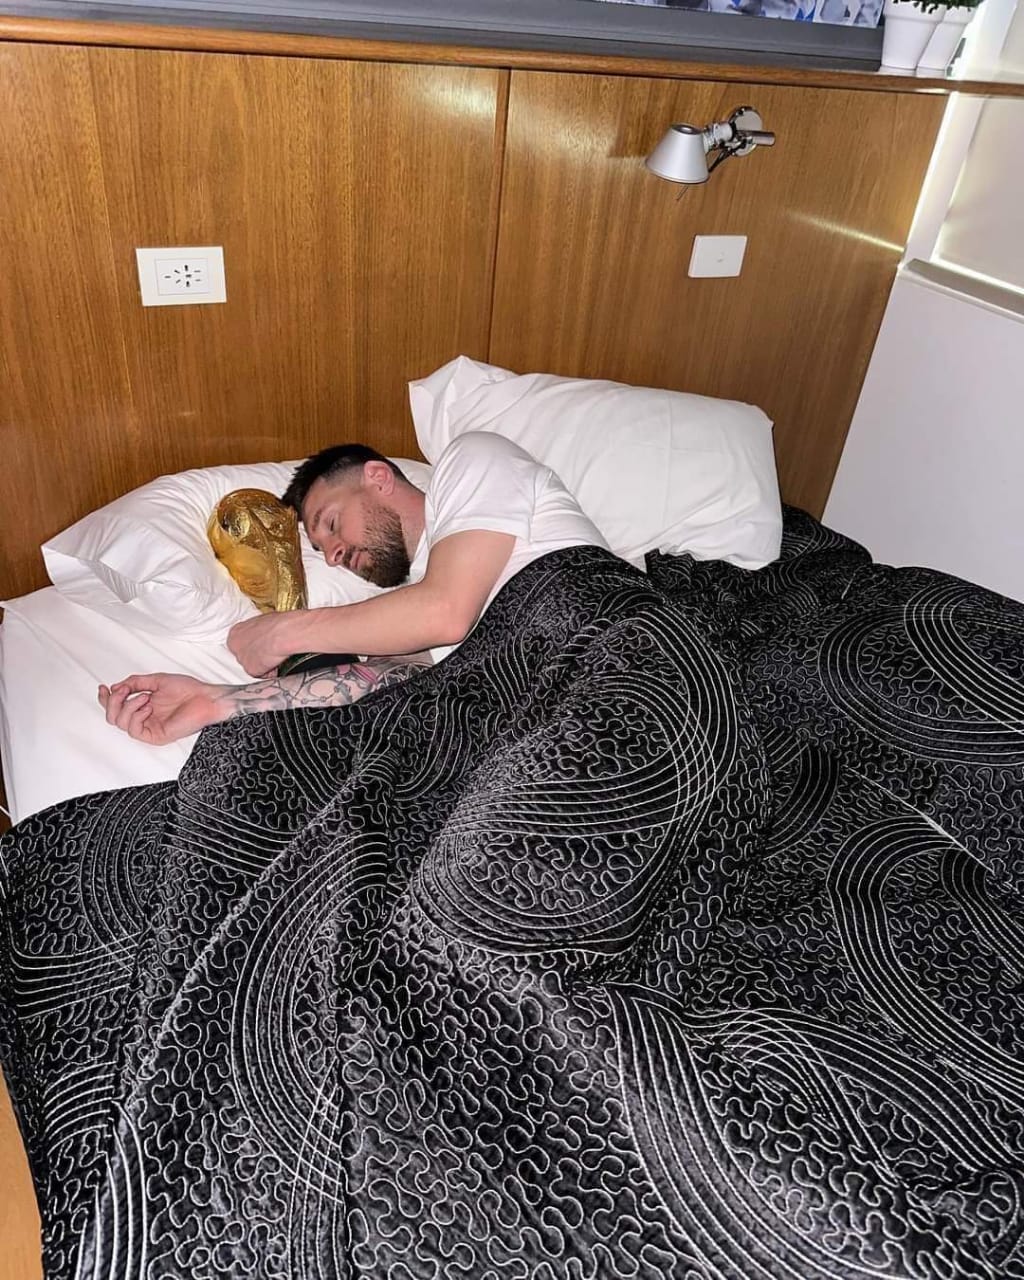 Lionel Messi Sleeping with FIFA World Cup Trophy 